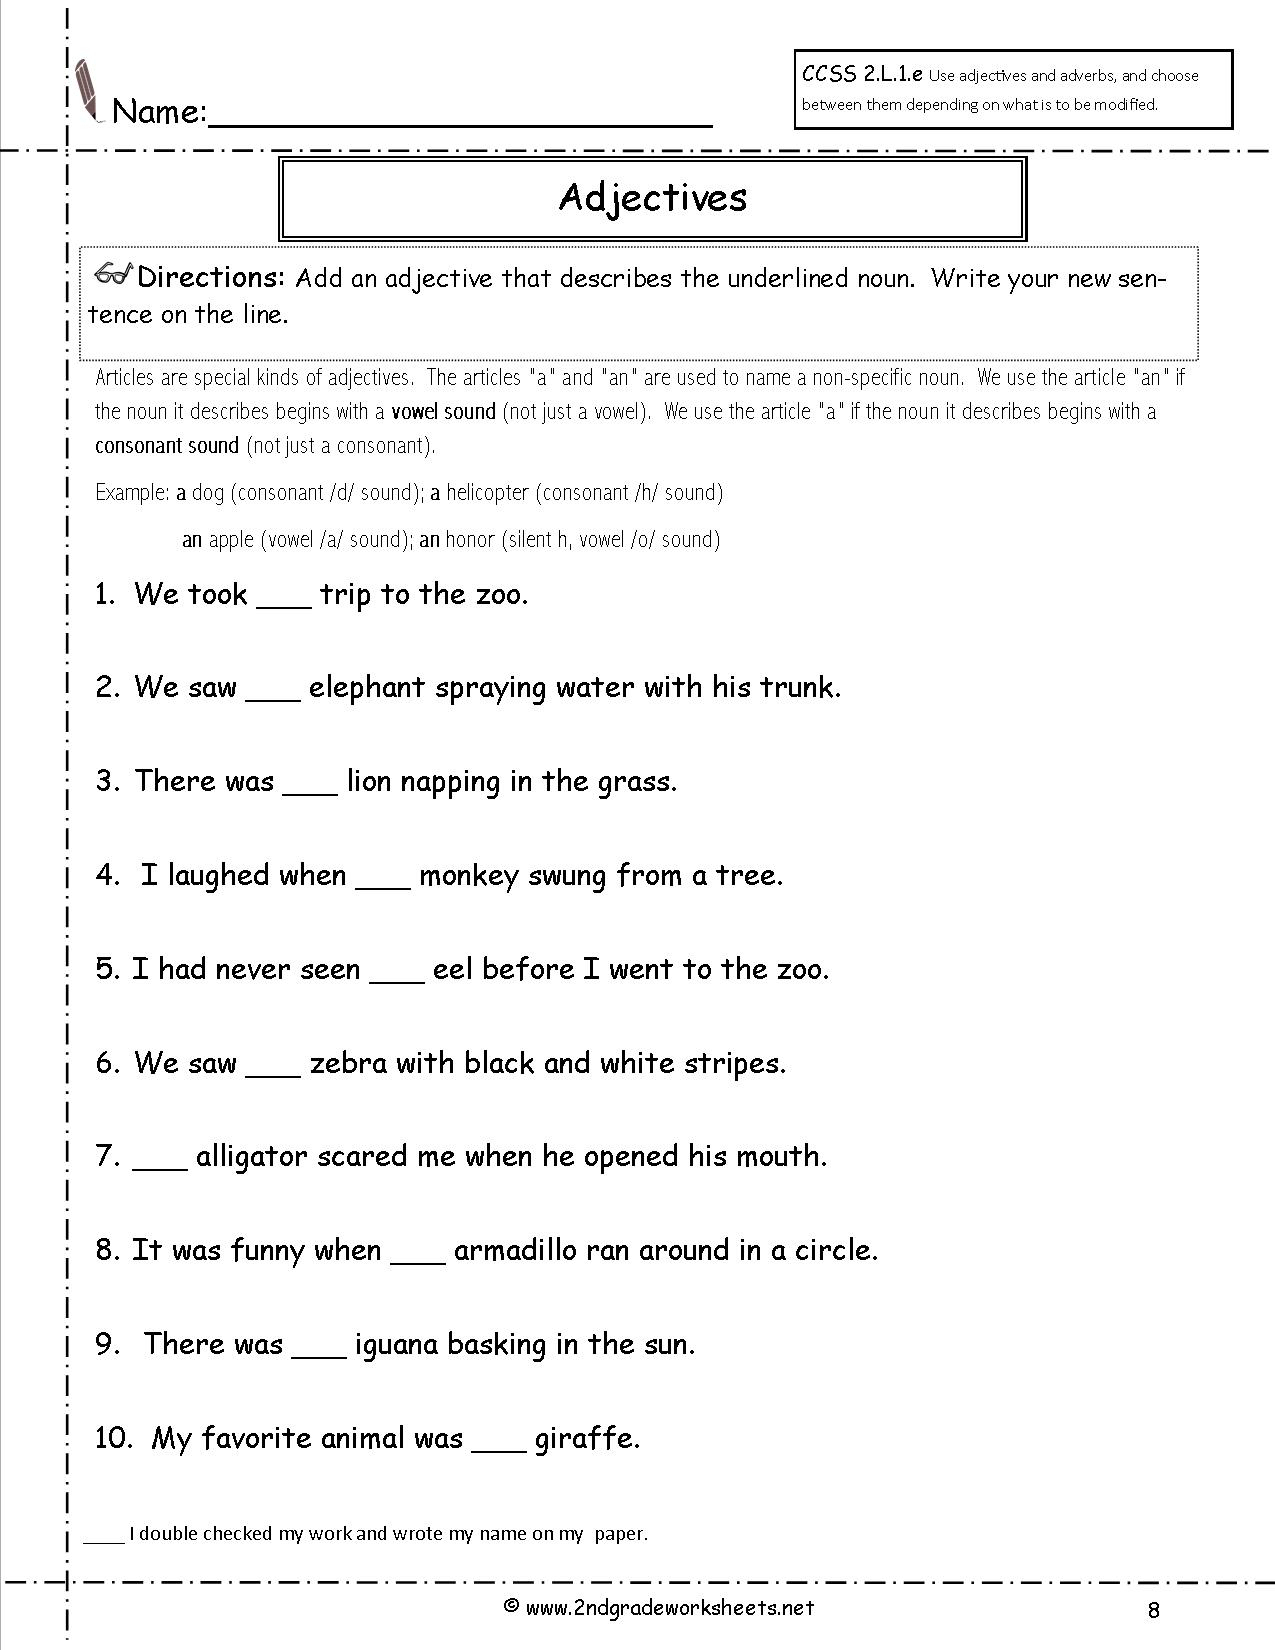 Free Printable Second Grade Worksheets » High School Worksheets | Free Printable Grammar Worksheets For Highschool Students